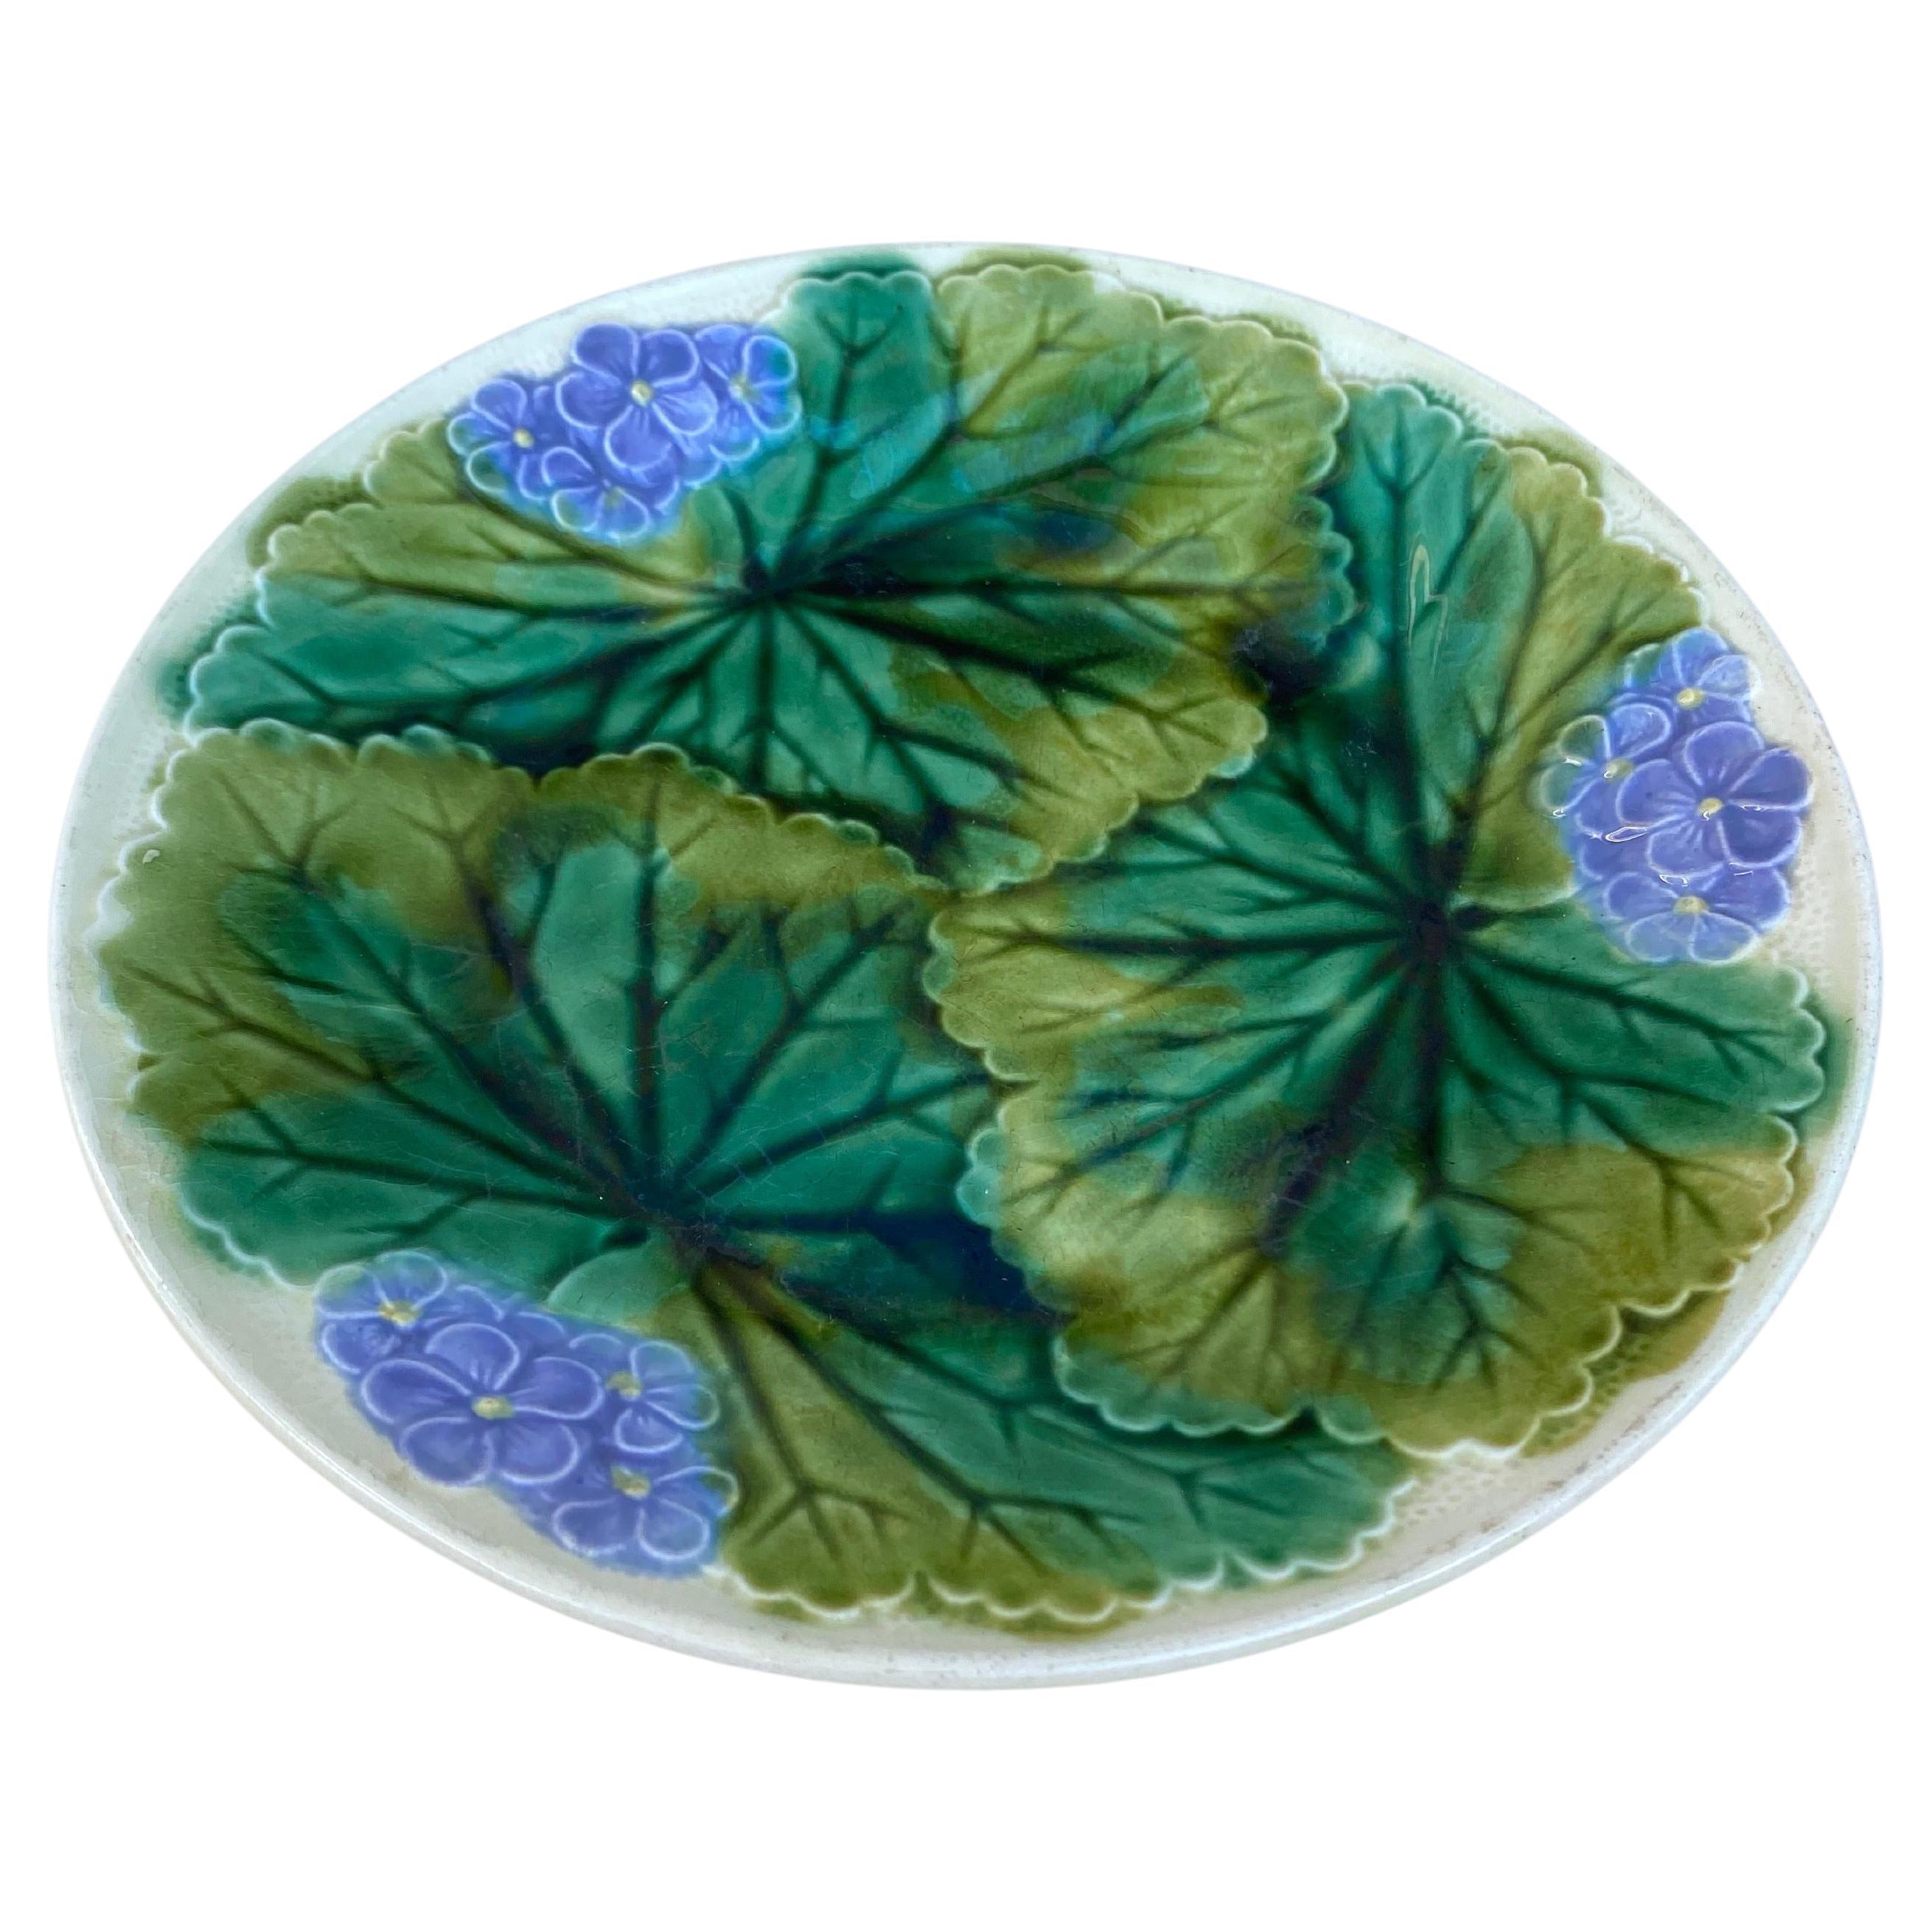 19th Century Majolica purple flowers plate signed Clairefontaine.